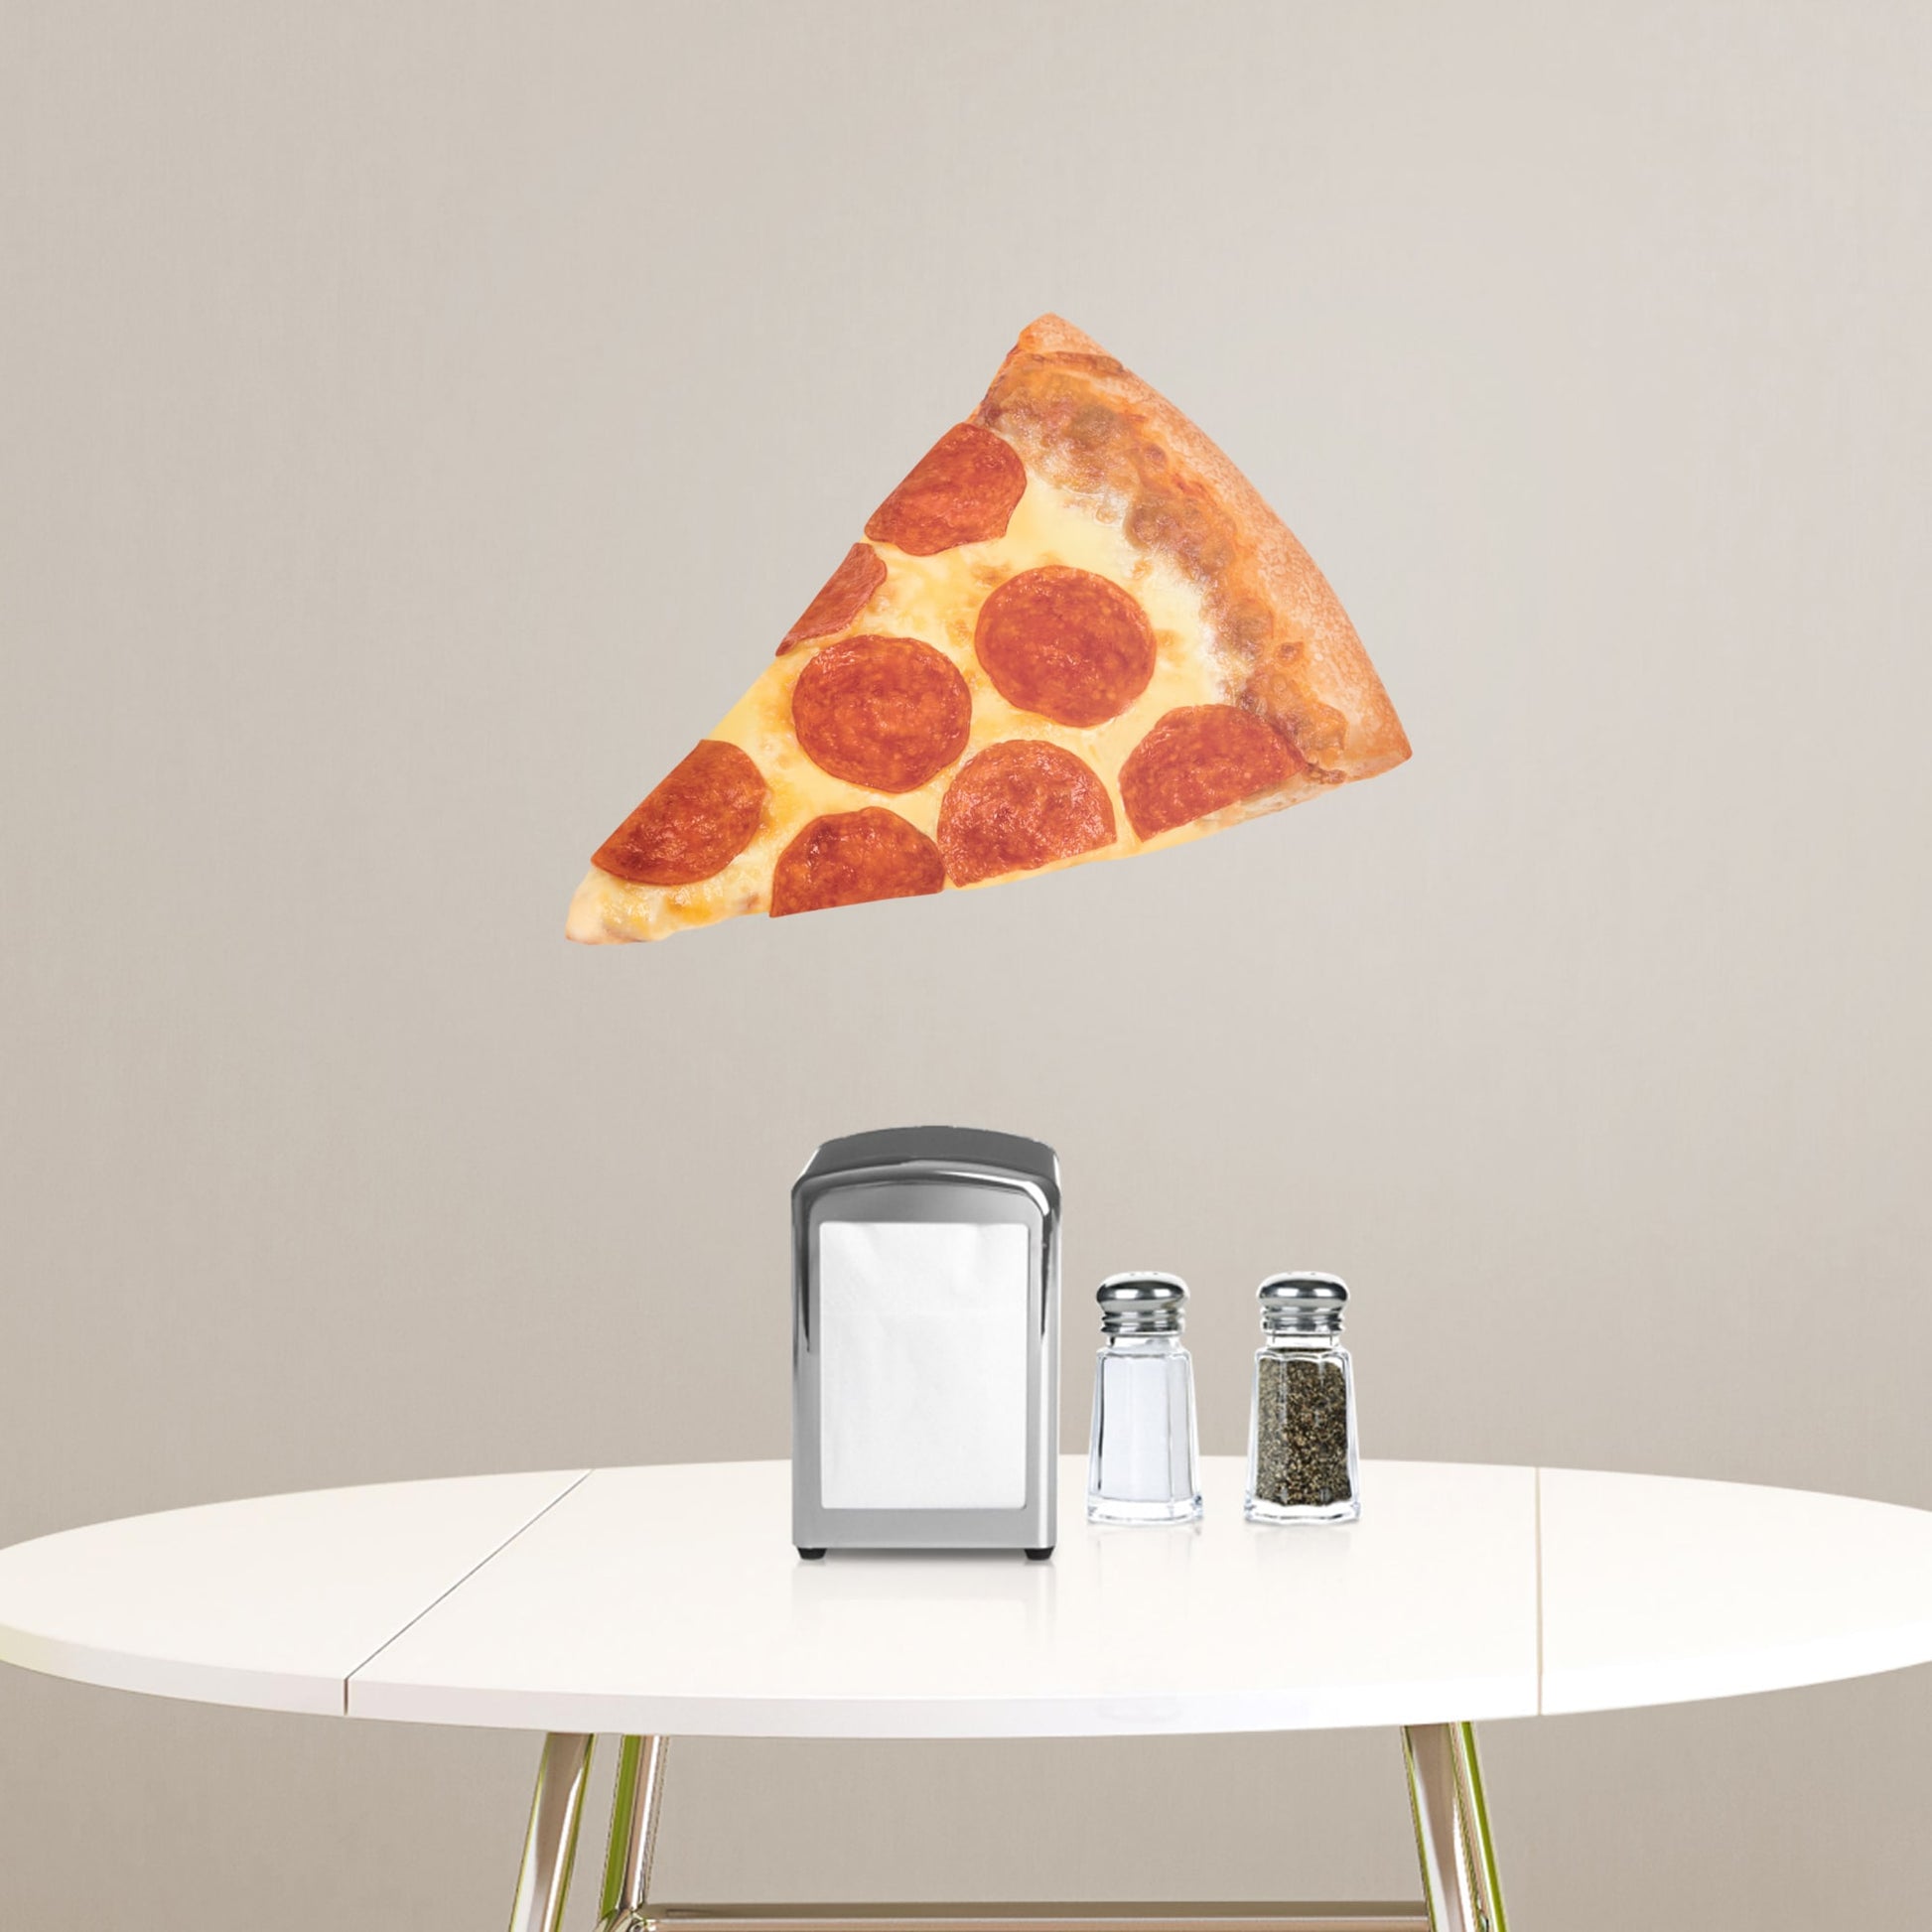 Large Pizza + 2 Decals (15"W x 13"H)